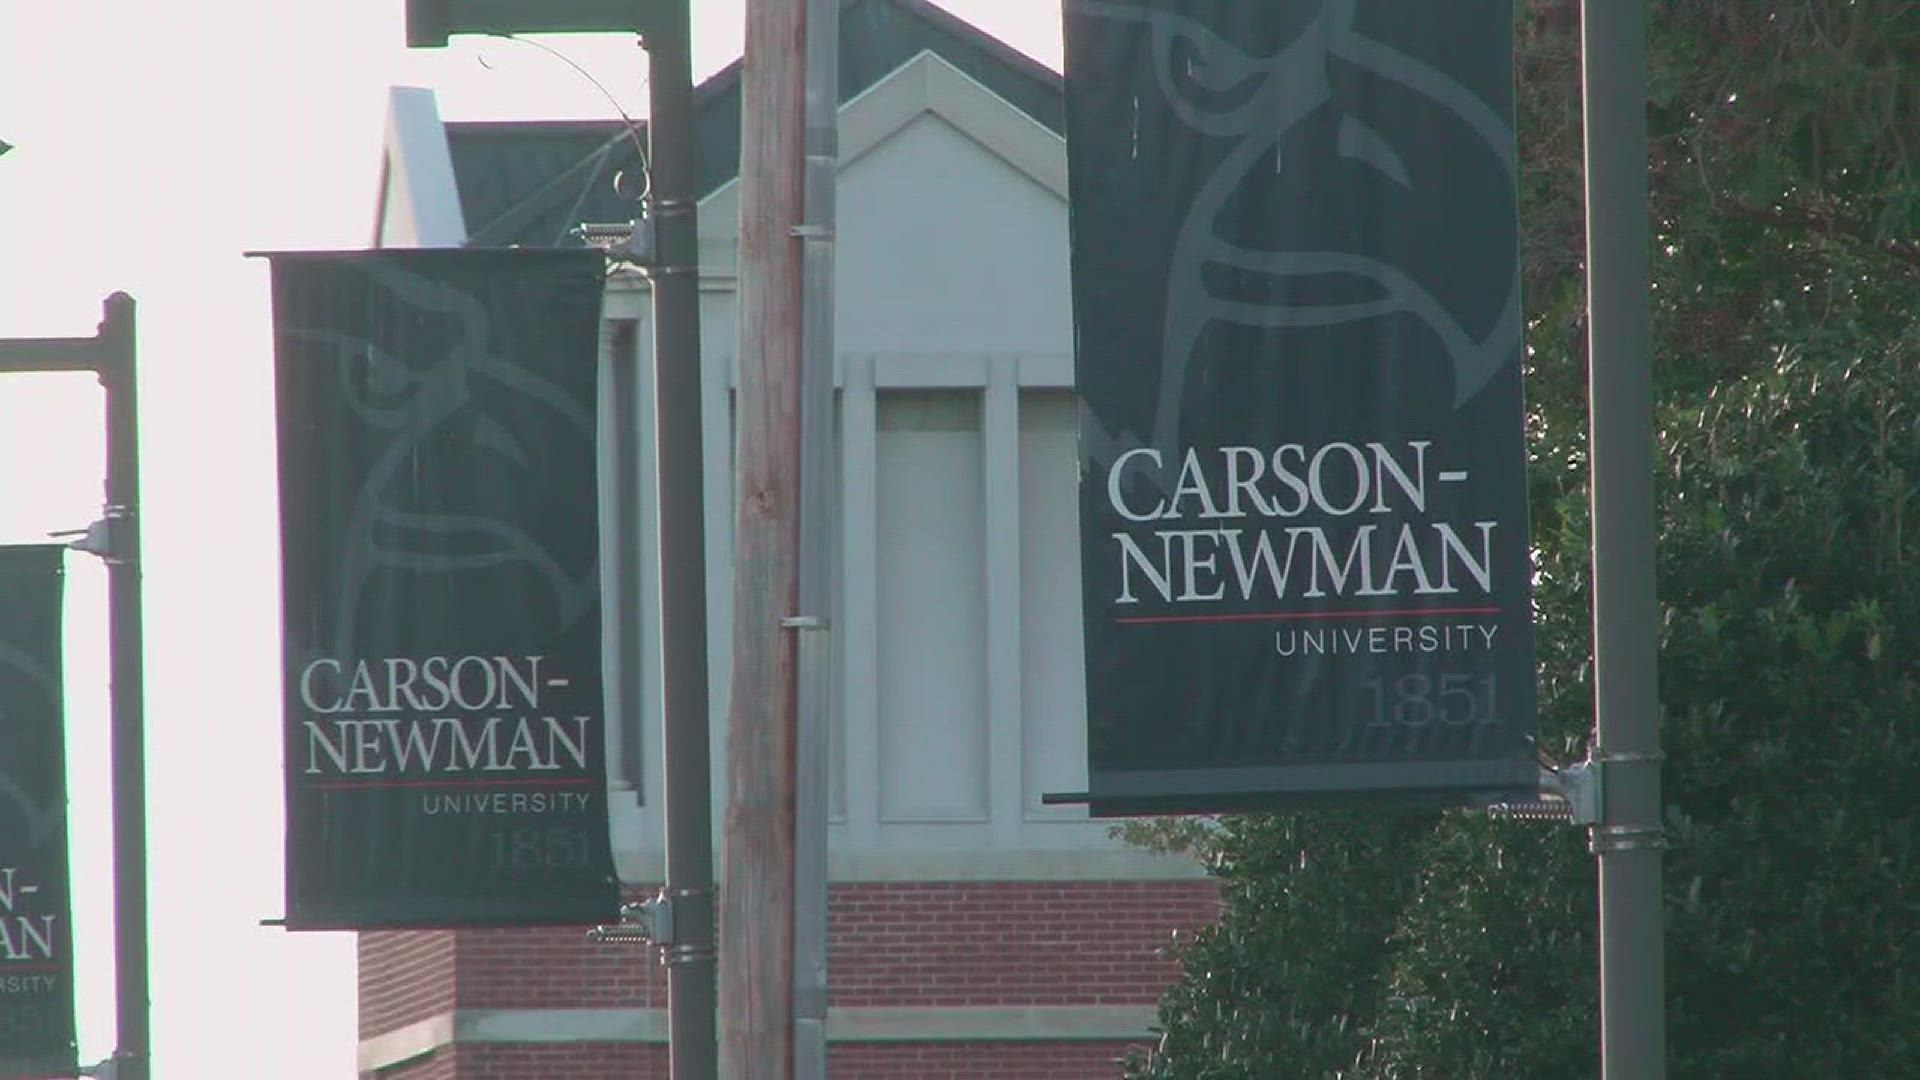 Oct. 18, 2017: Starting next fall, Carson-Newman University will offer a program aimed at getting students to graduate faster and cheaper.